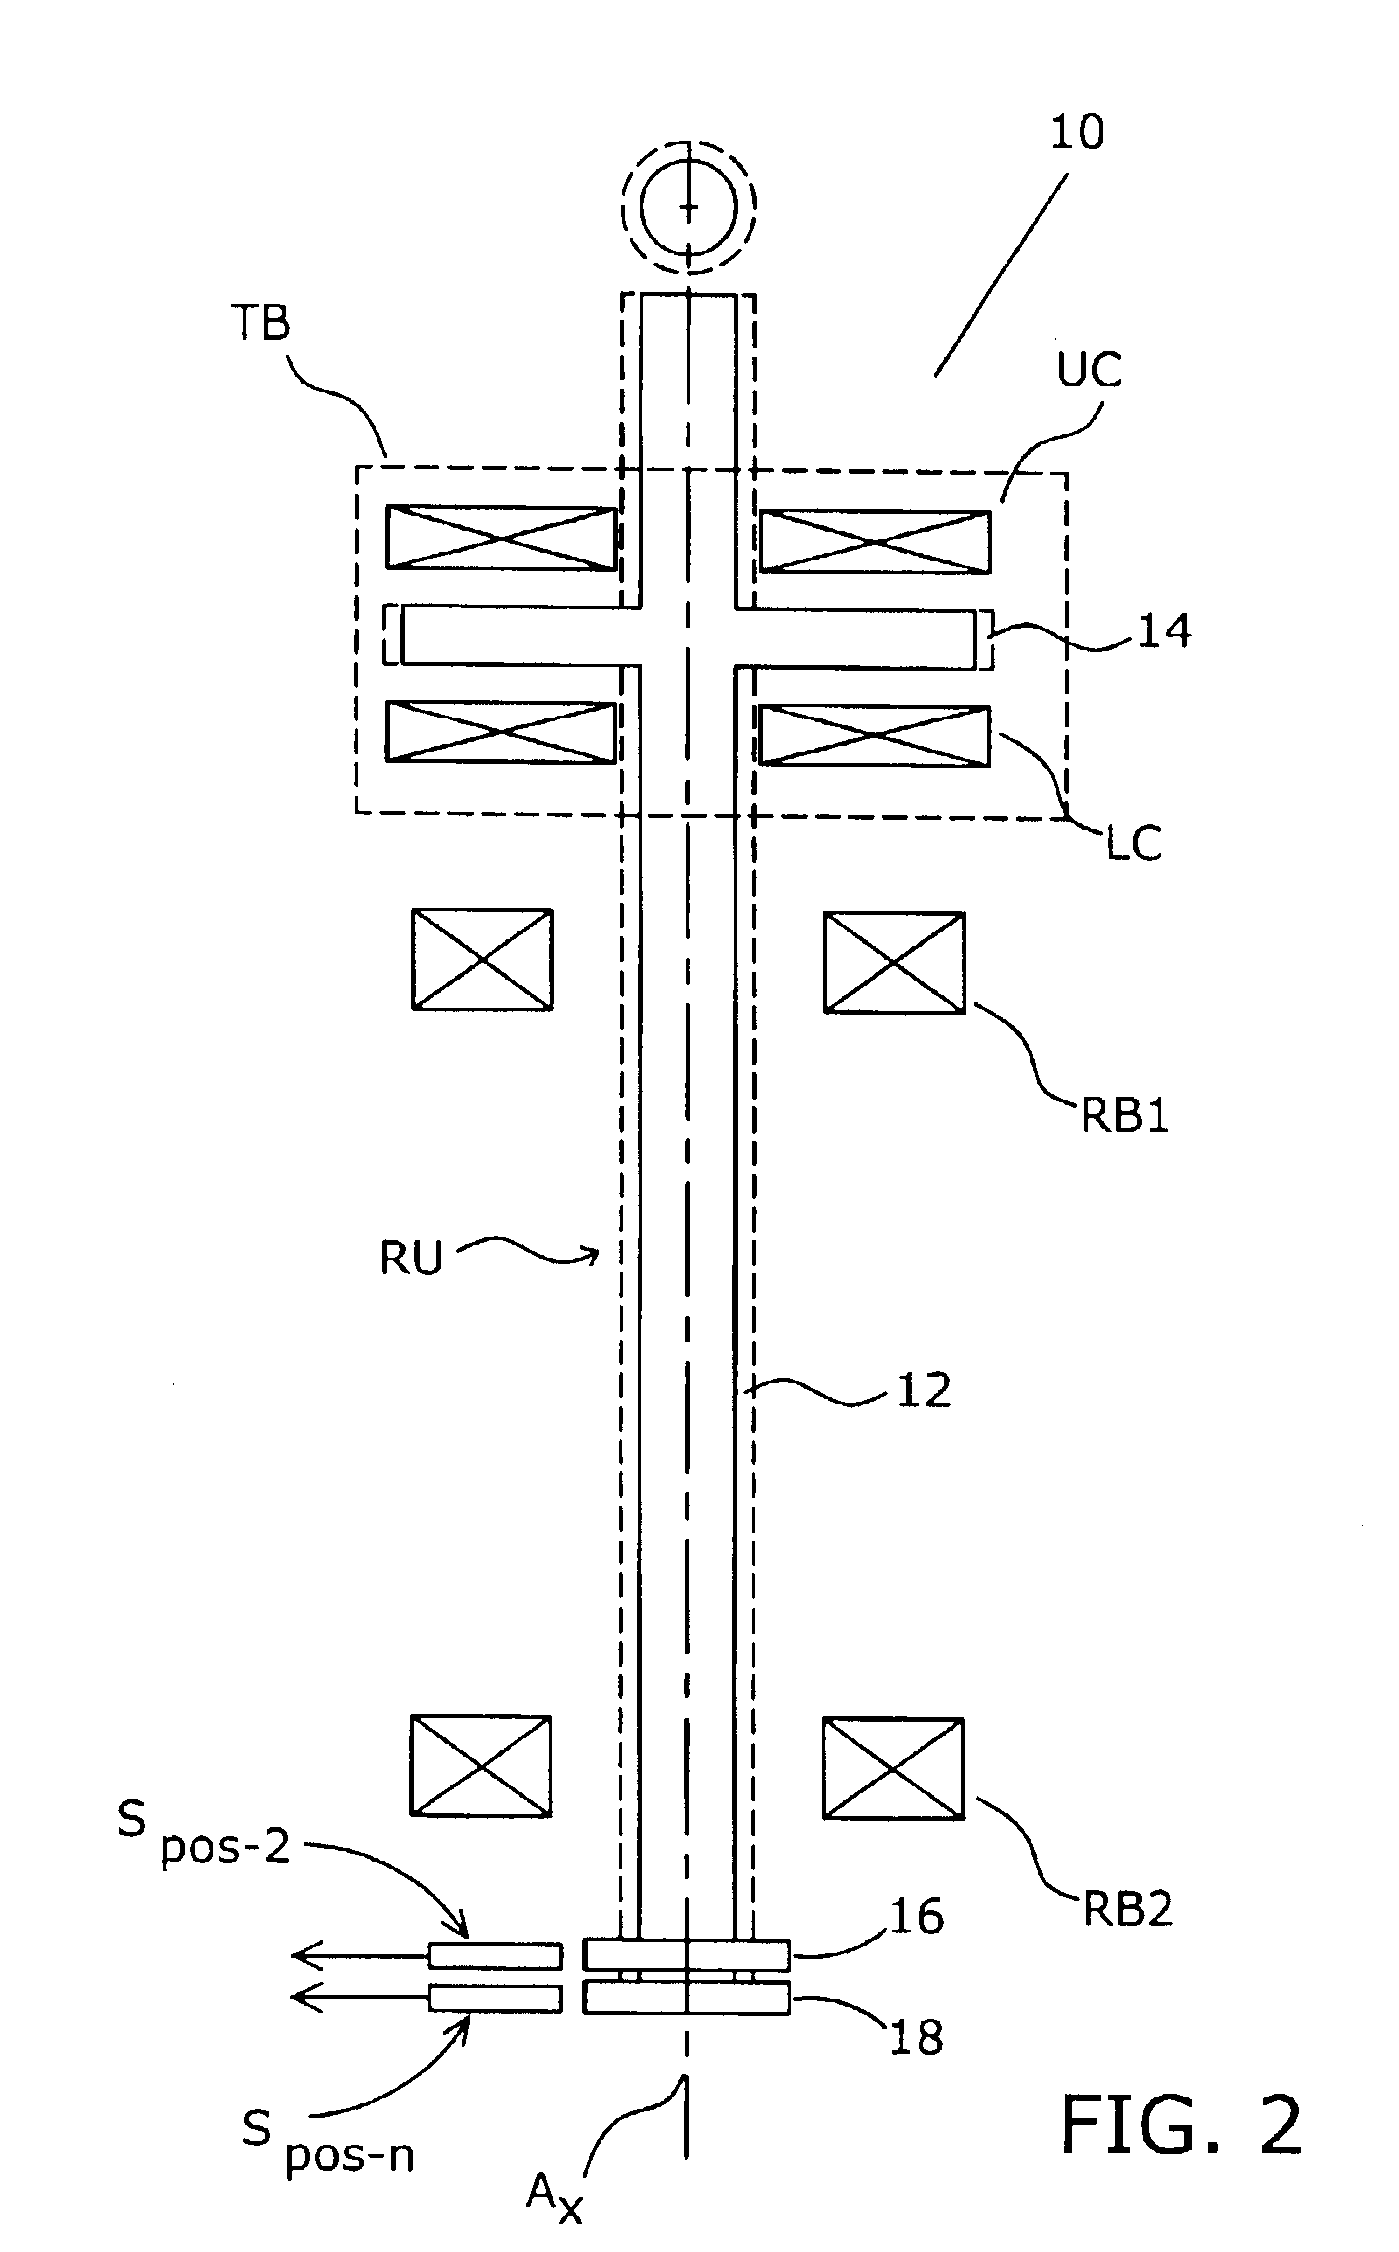 System for controlling a magnetically levitated rotor